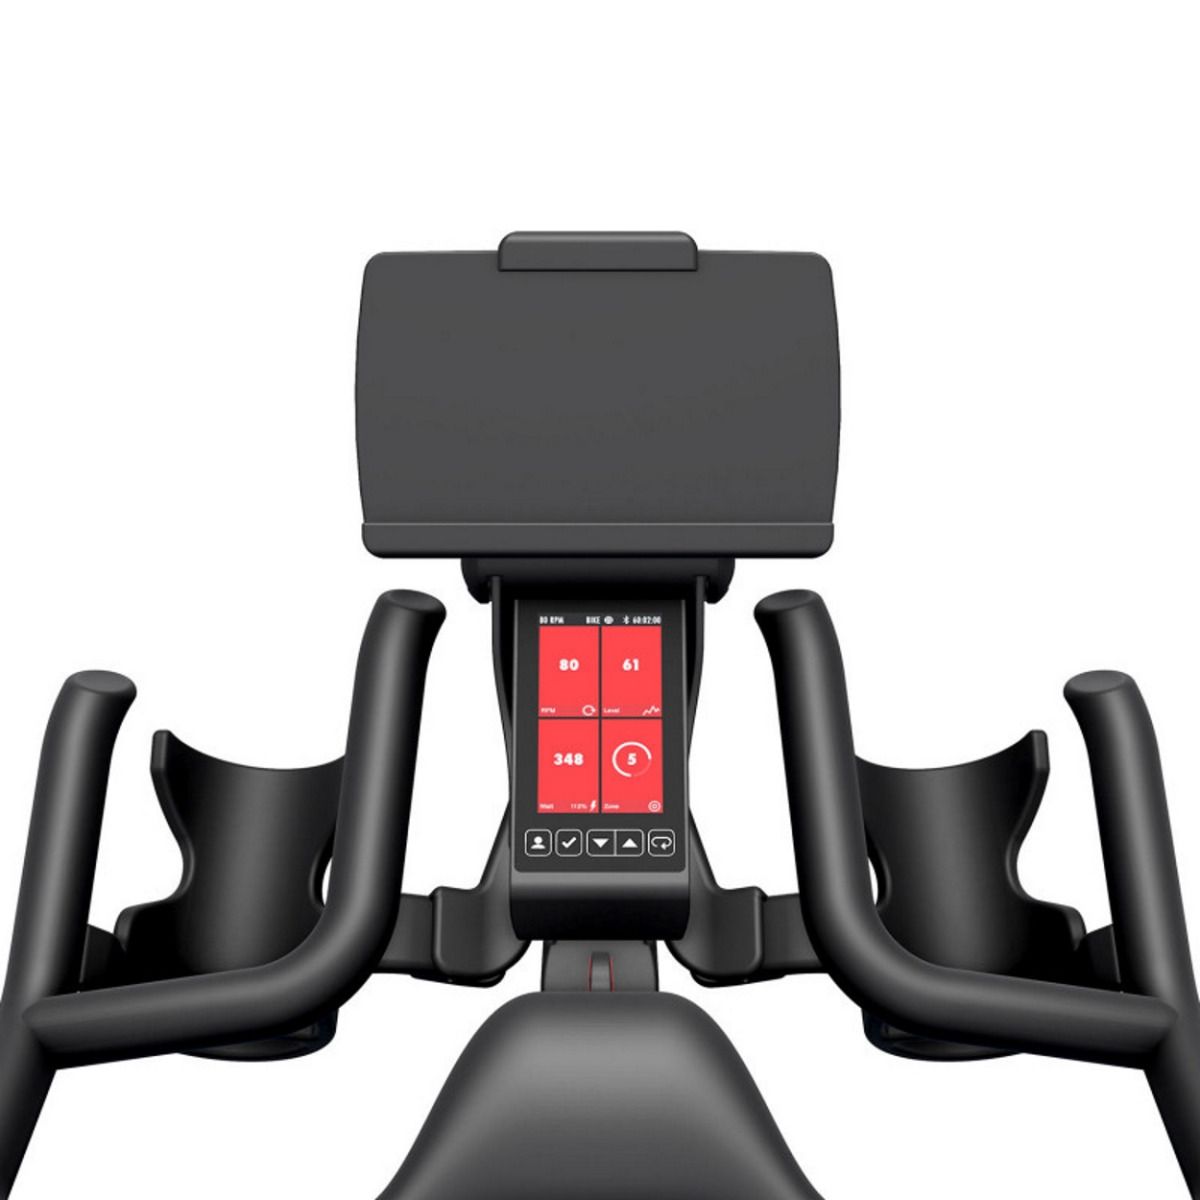 life fitness ic7 tablet holder